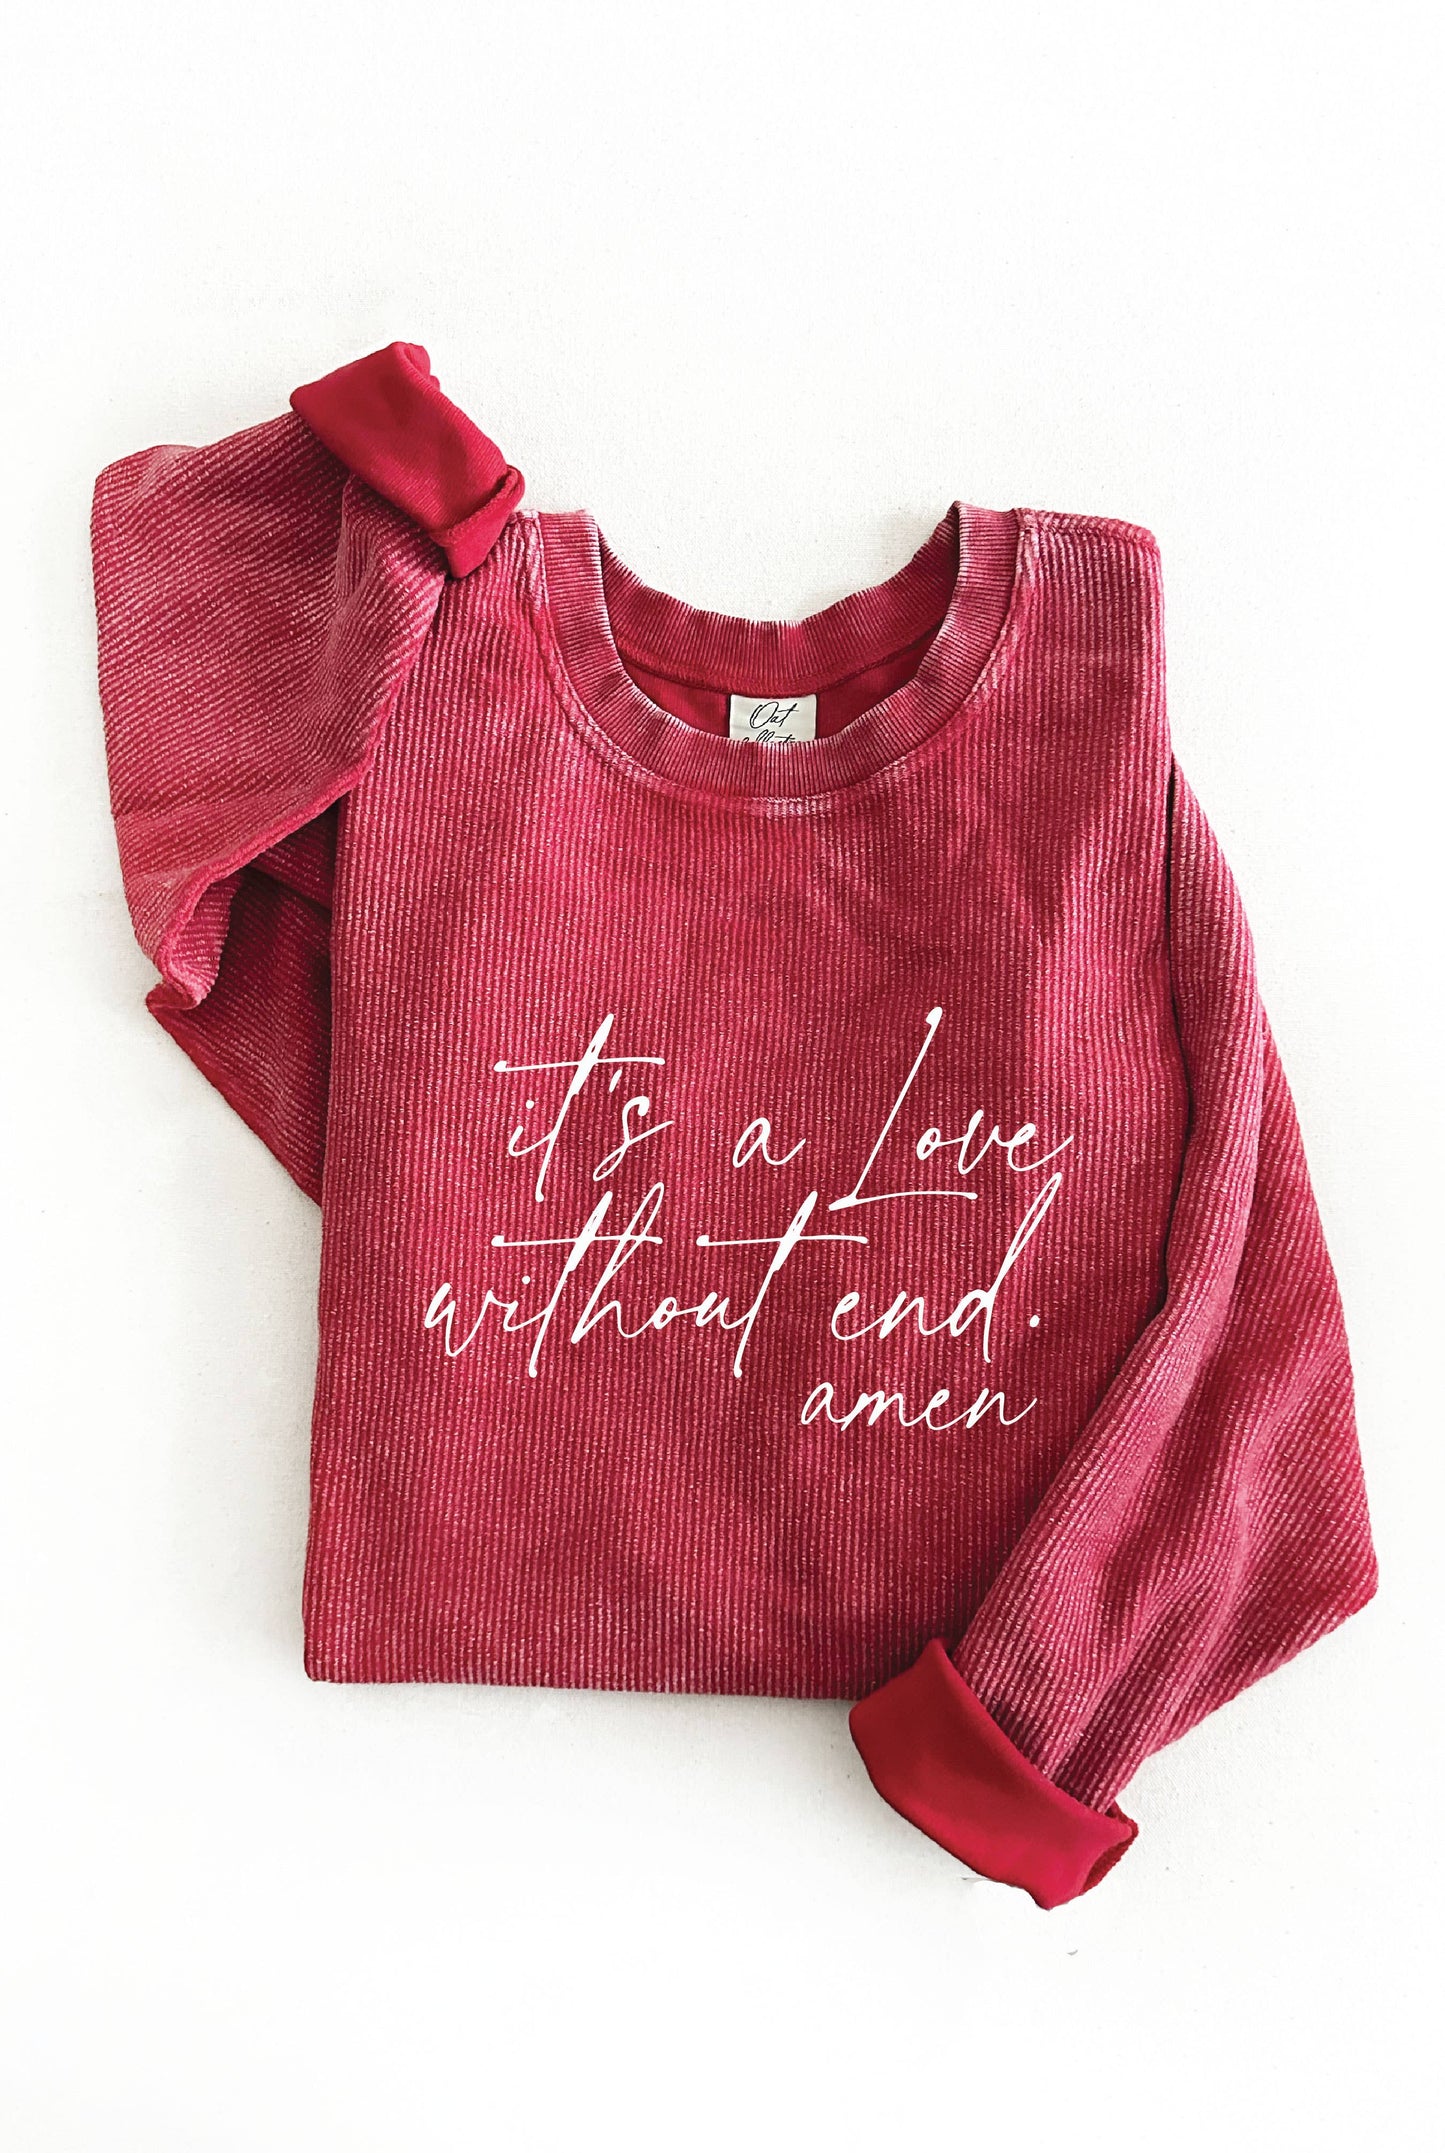 IT'S A LOVE WITHOUT END. AMEN Thermal Vintage Pullover: L / VINTAGE CHARCOAL